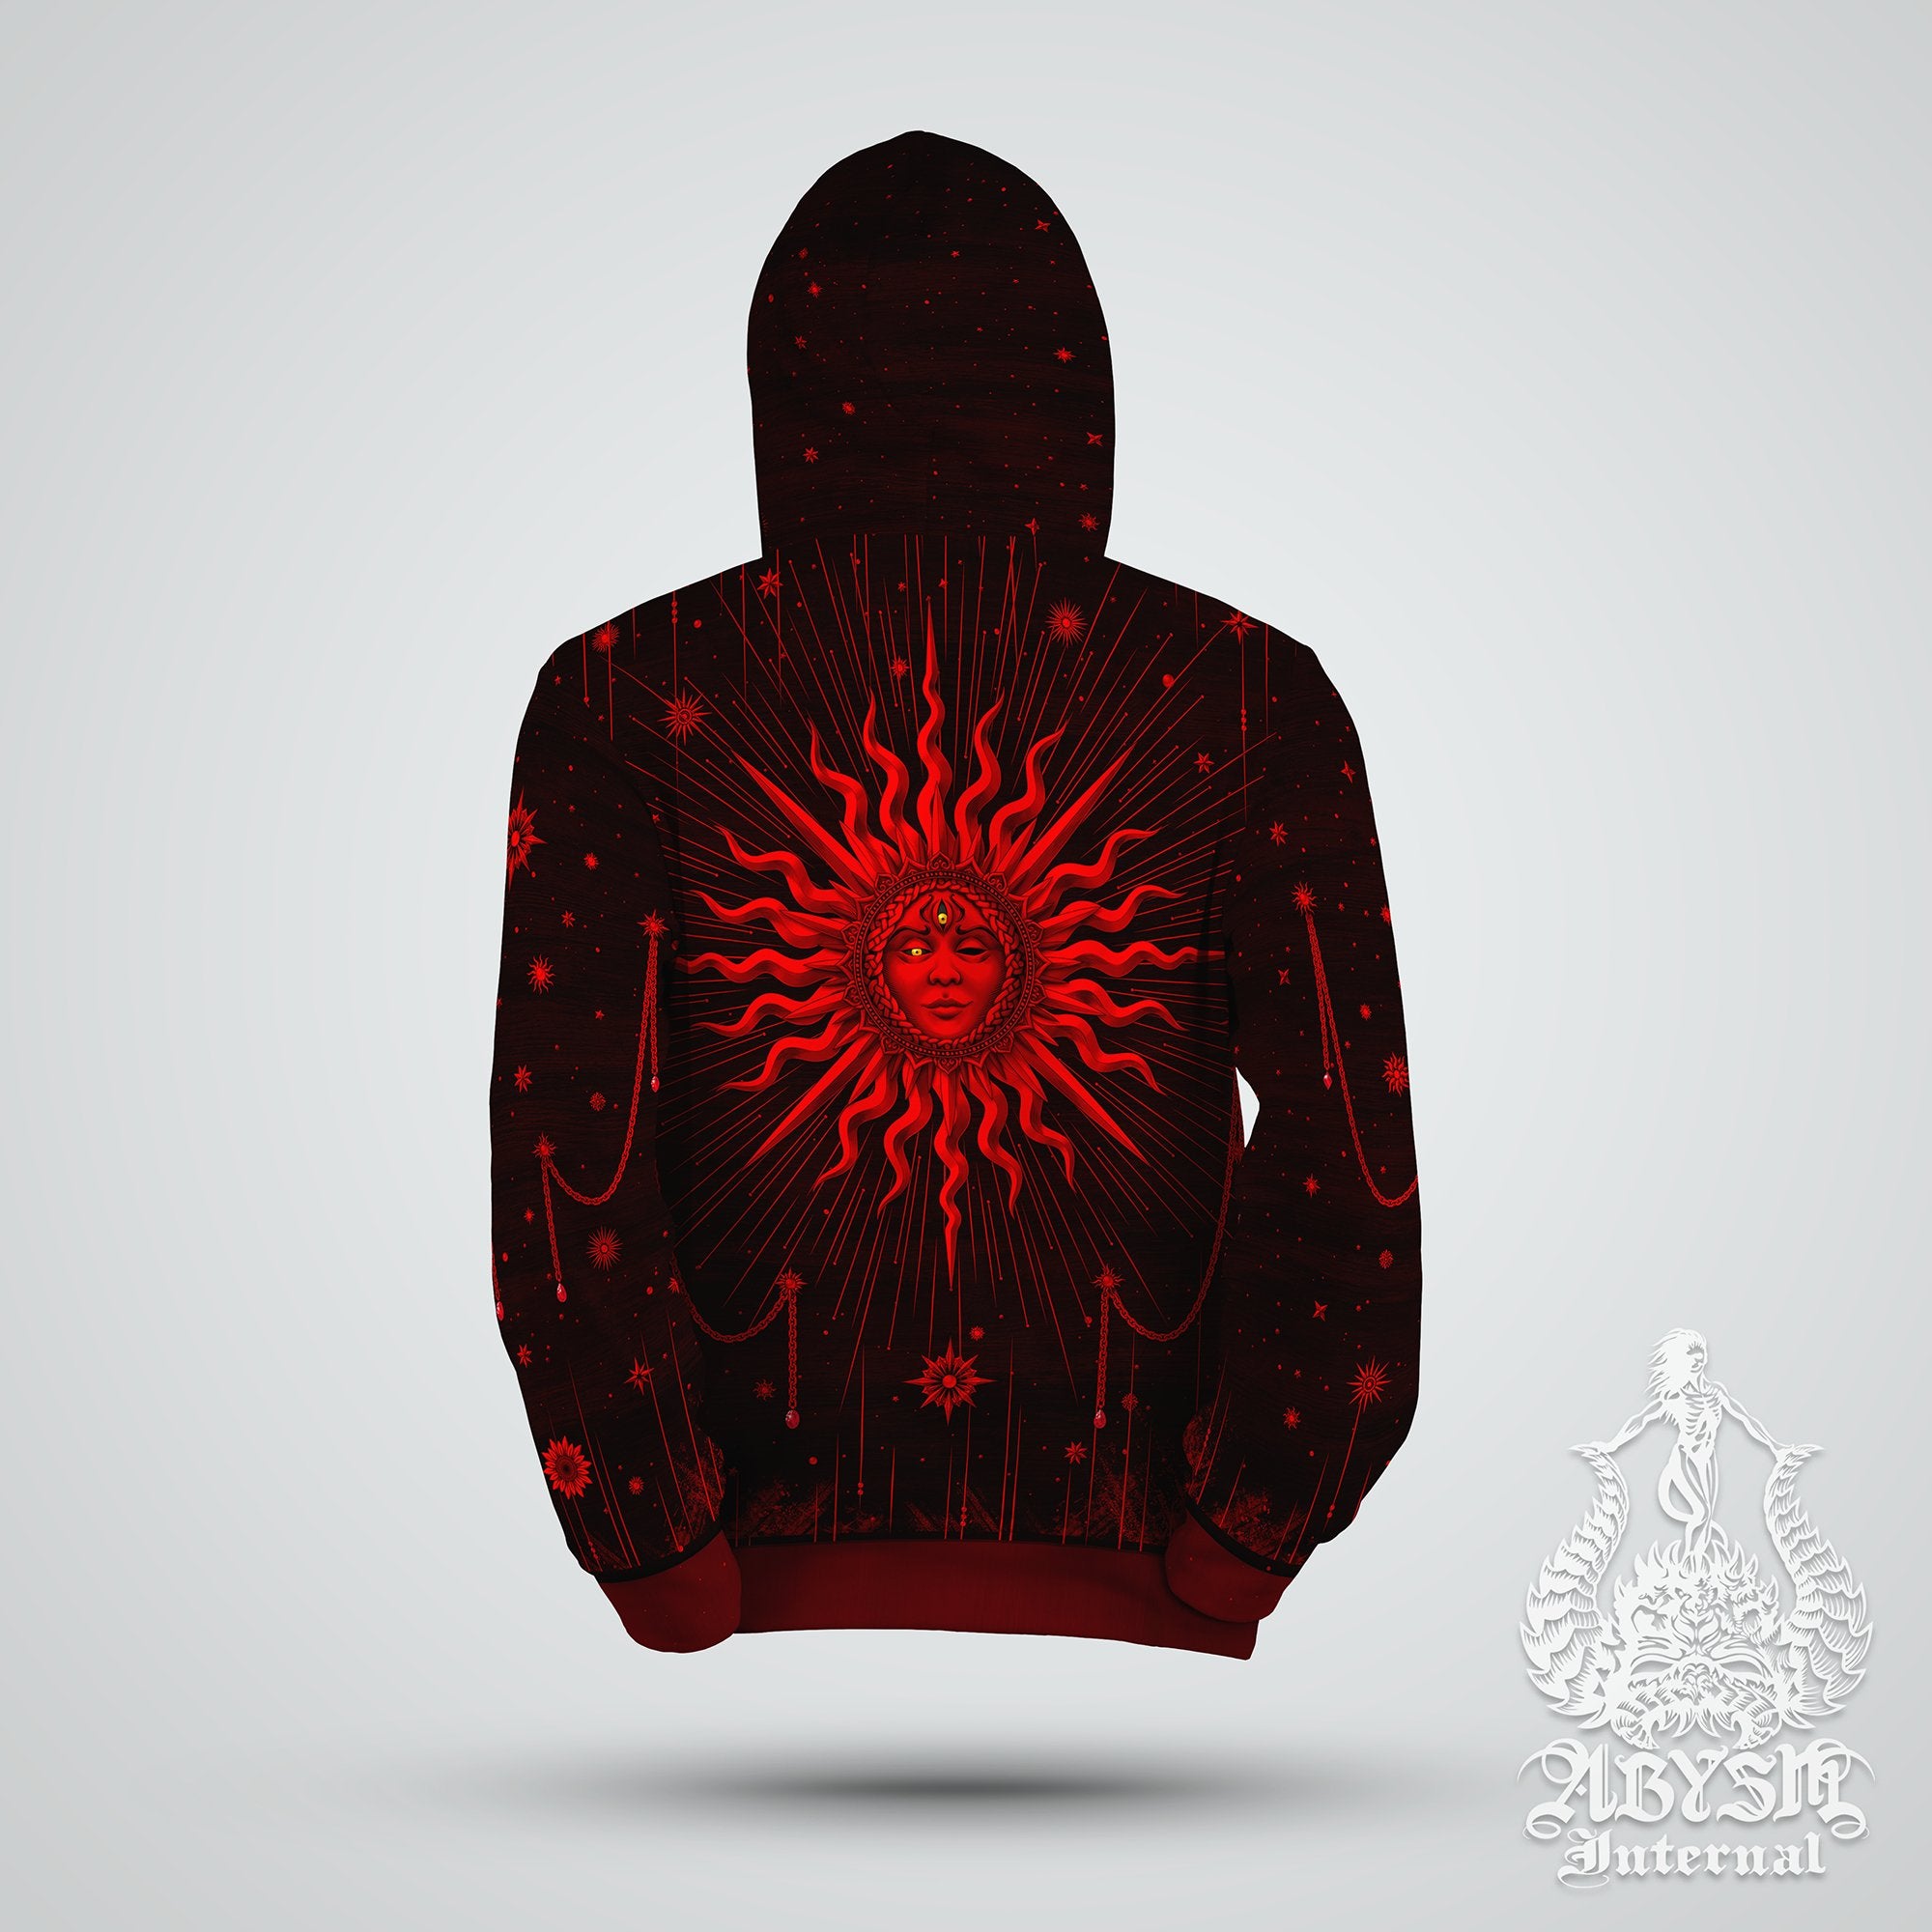 Gothic Red Sun Hoodie, Sorcerer Pullover, Witchy Sweater, Goth Tarot Arcana Outfit, Magic and Esoteric Streetwear, Black Alternative Clothing, Unisex - Abysm Internal